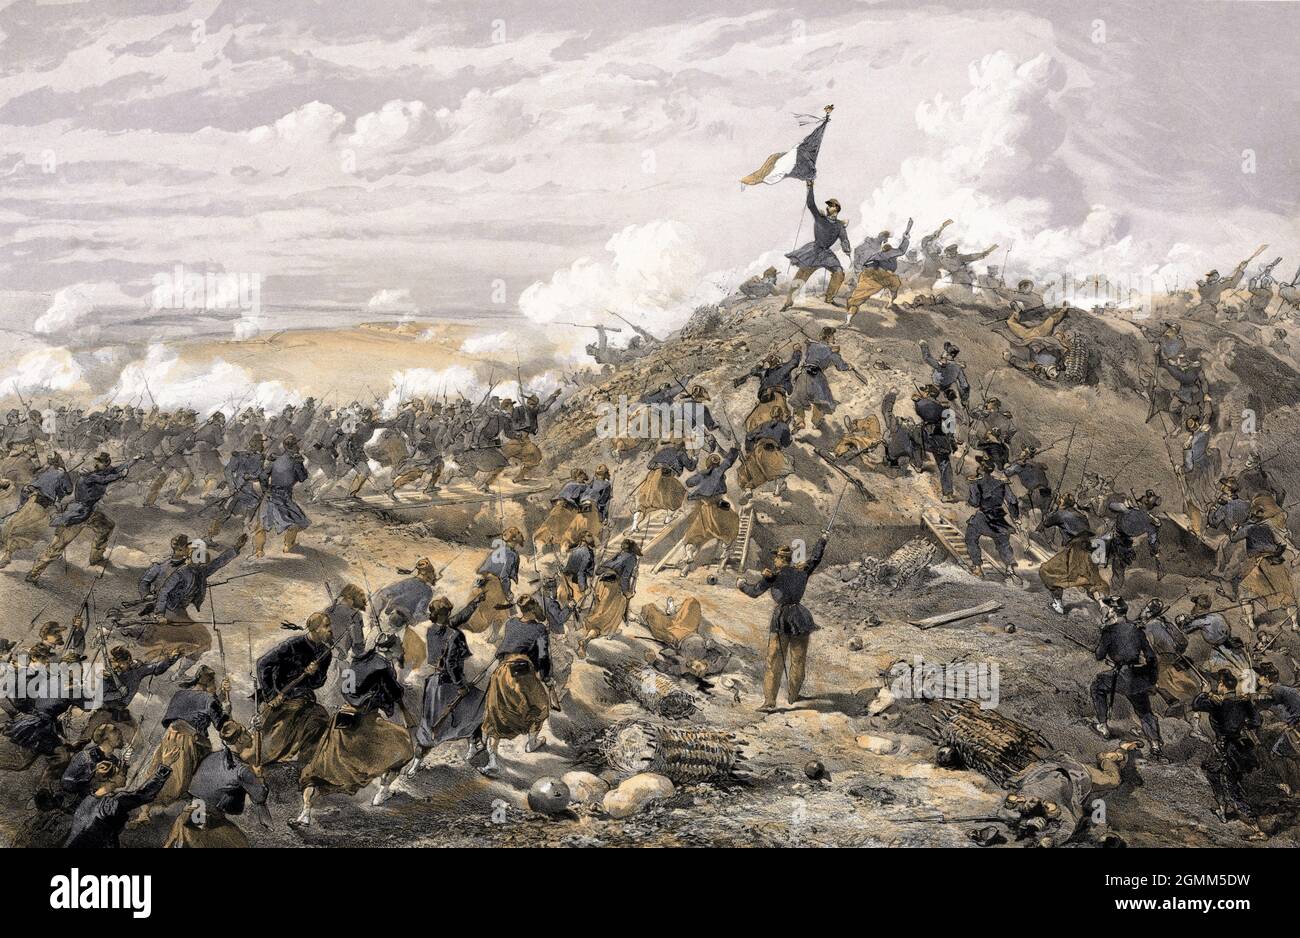 The Battle of Malakoff during the Crimean War, in which the French stormed and took th estrategic point of Malakoff. The work shows French zouave Eugène Libaut raising the French flag on the top of the Russian redoubt. Stock Photo